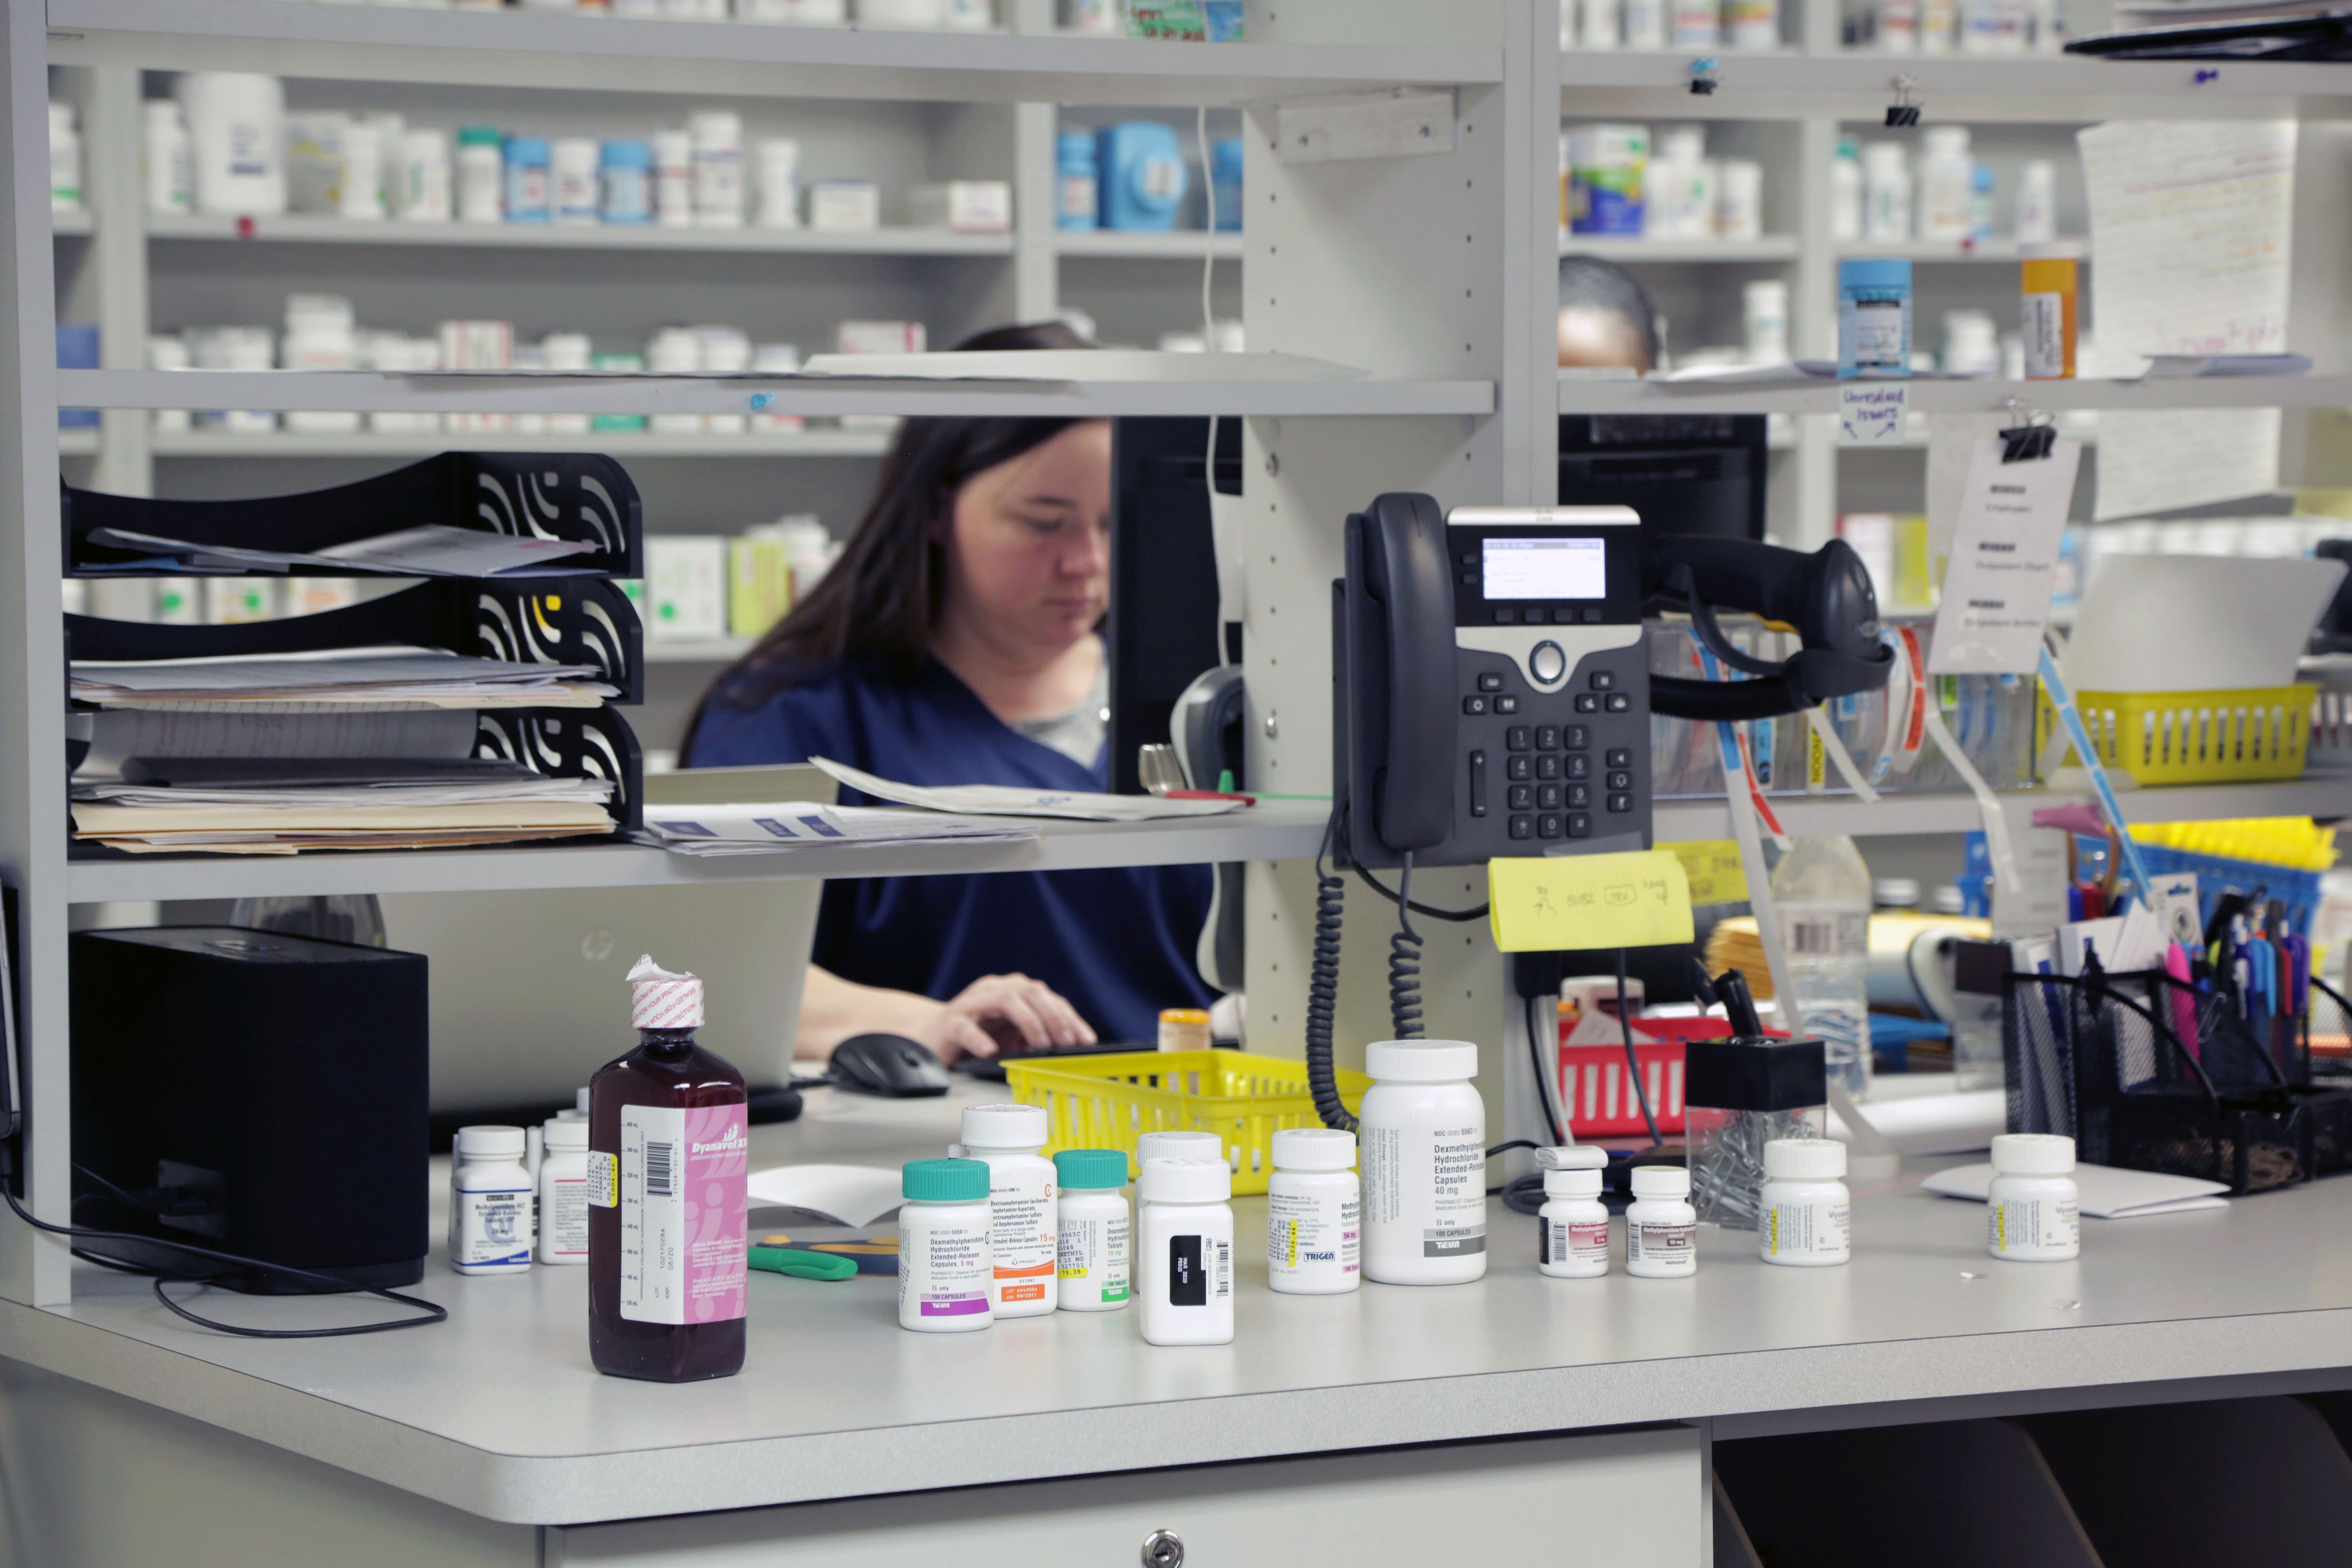 A person preparing medications at a pharmacy counter